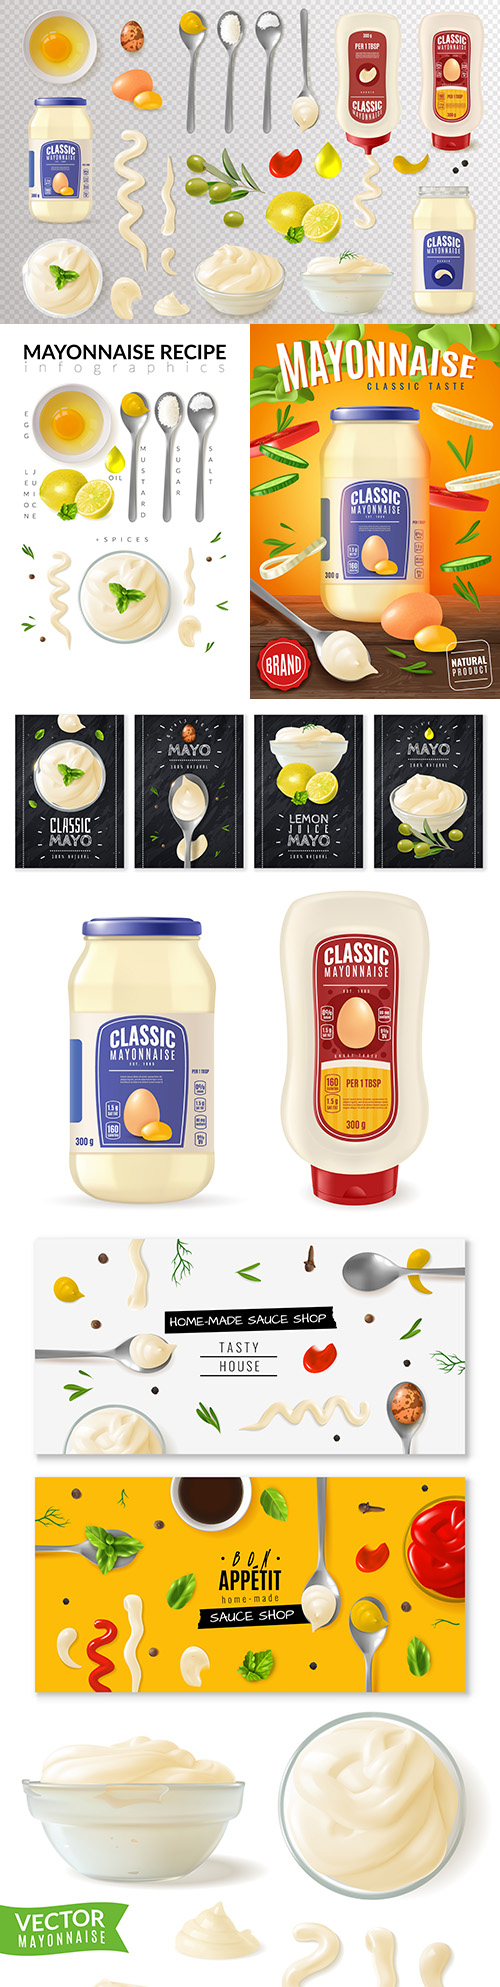 Realistic illustrations of glass can mayonnaise and recipe
